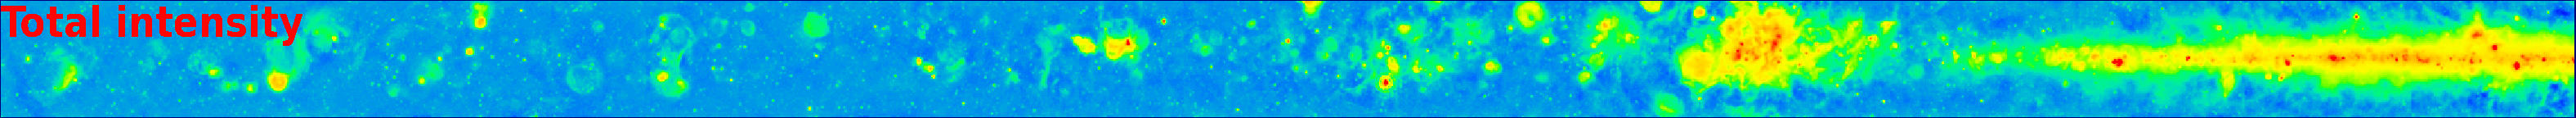 [I intensity map of the Galactic plane in the survey field]